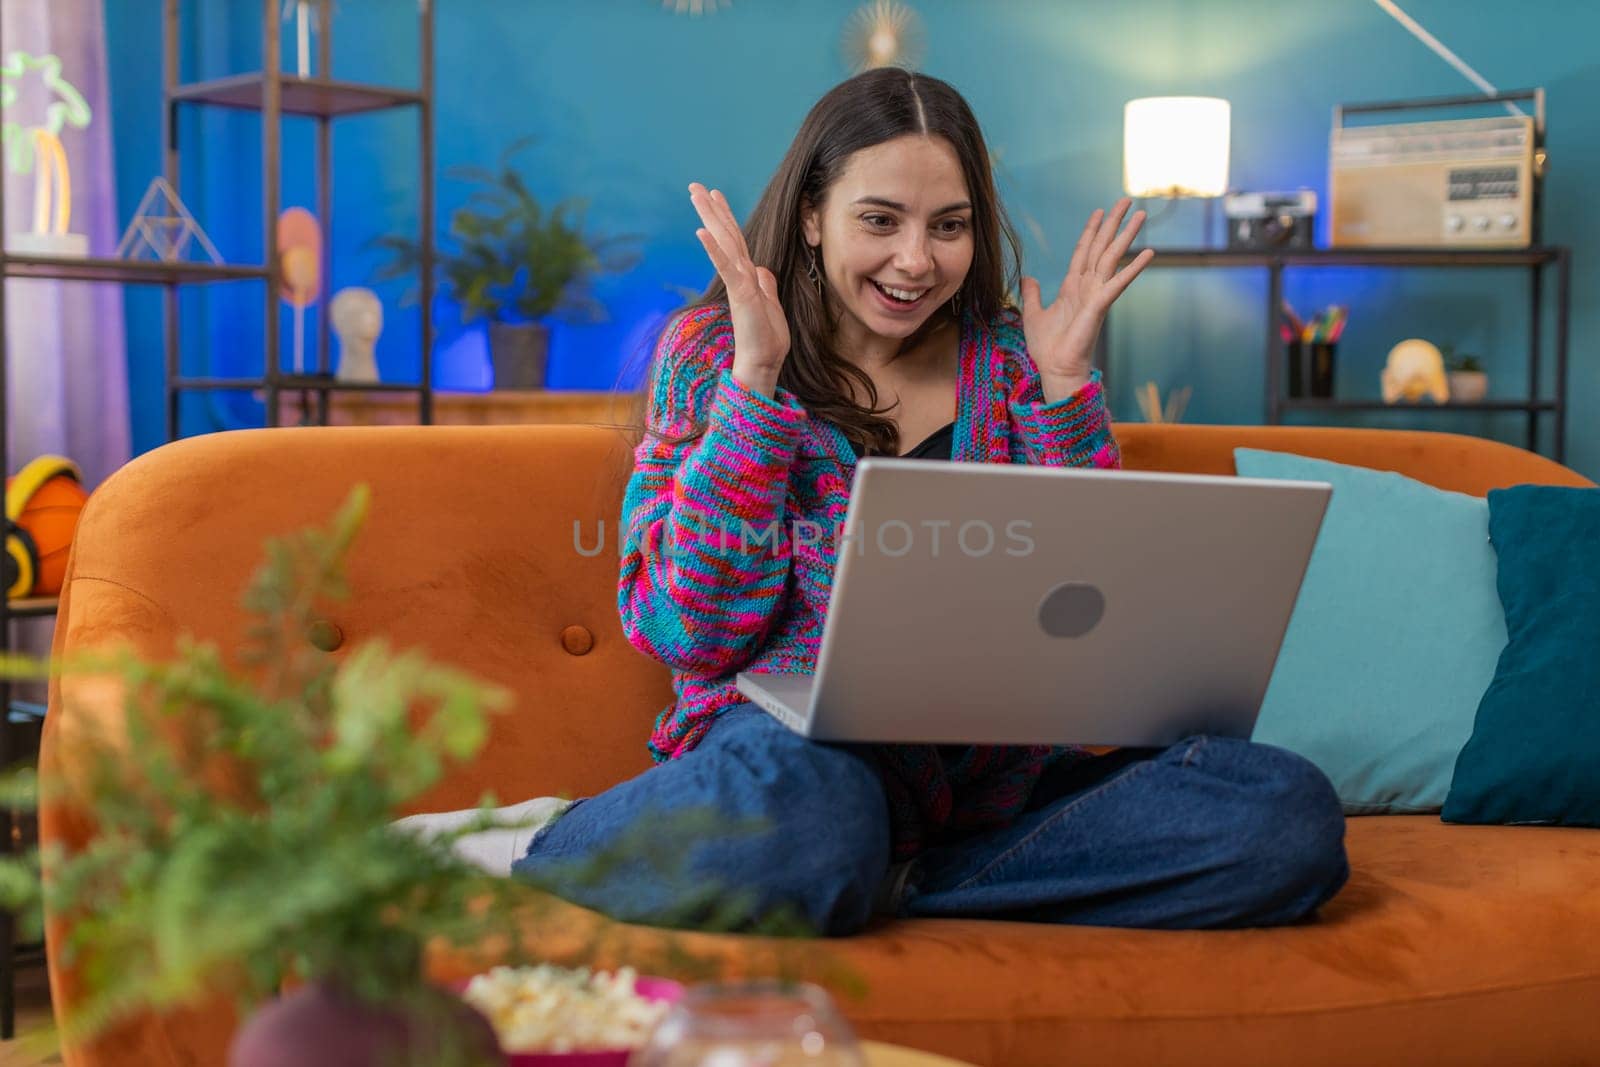 Surprised Caucasian woman using laptop computer, receive mail good news message, shocked by sudden victory celebrate lottery jackpot win purchases online shopping at home apartment on sofa. Lifestyles